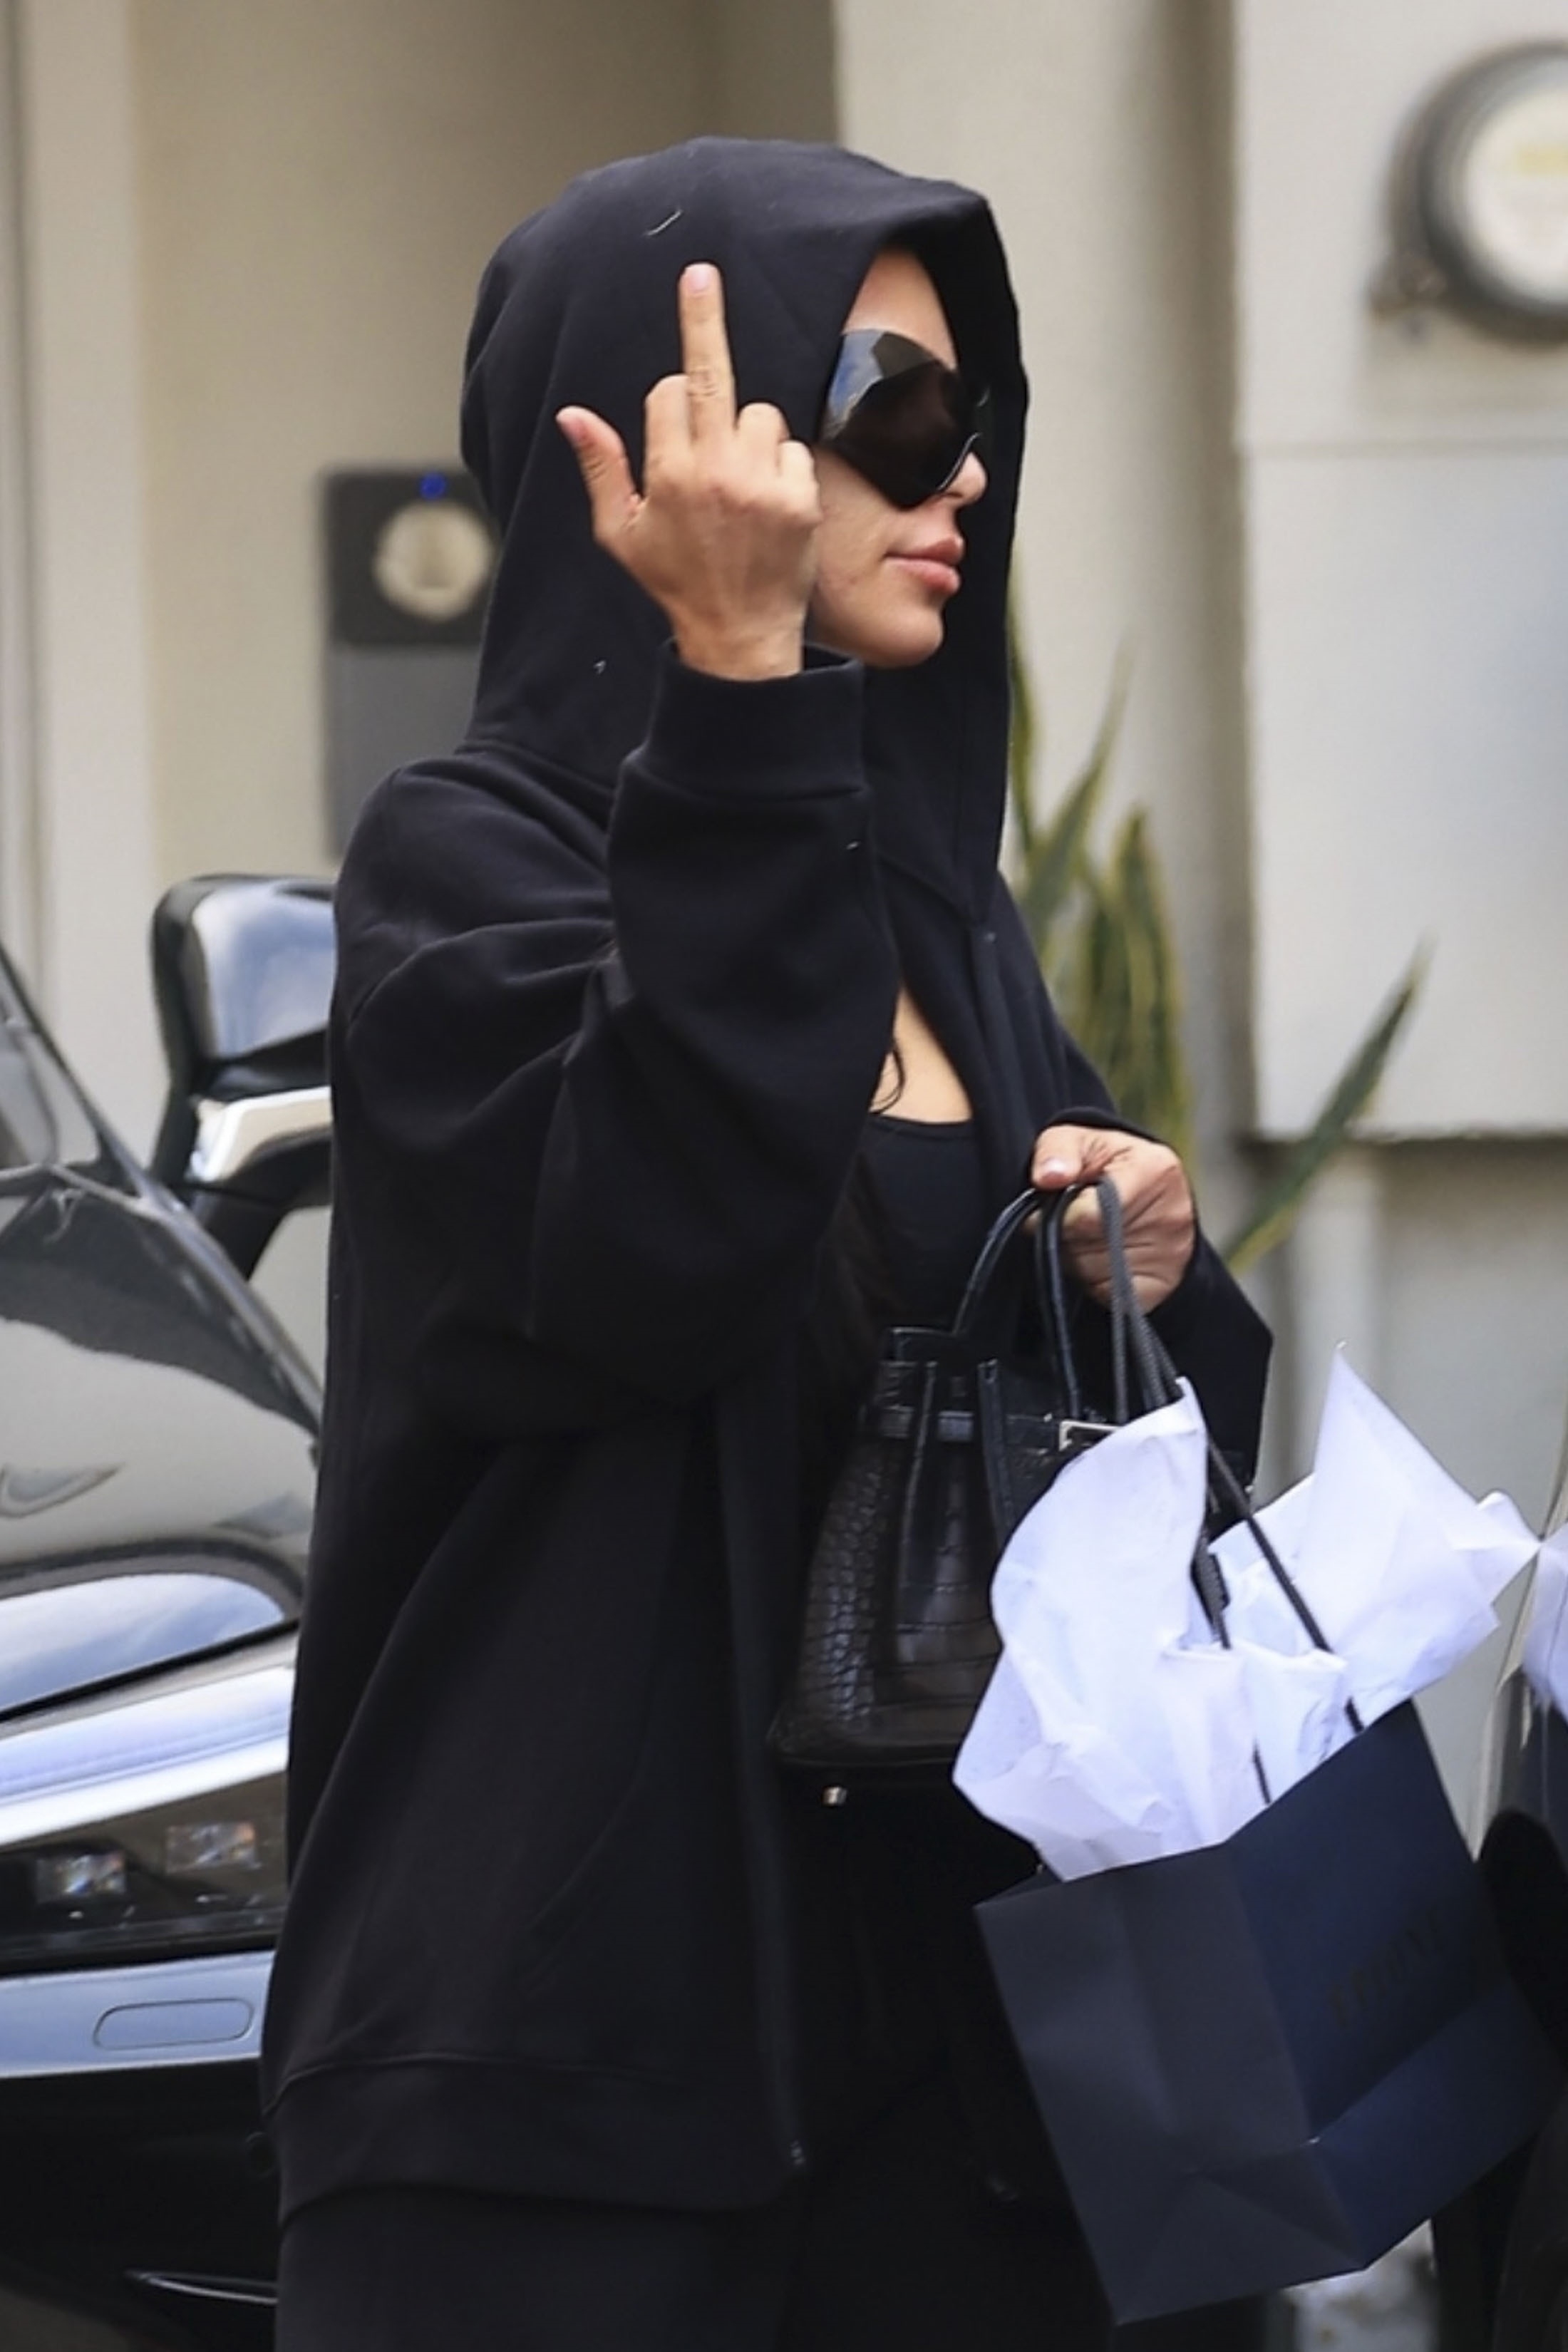 Once she saw photographers, she was quick to flip off the paparazzi